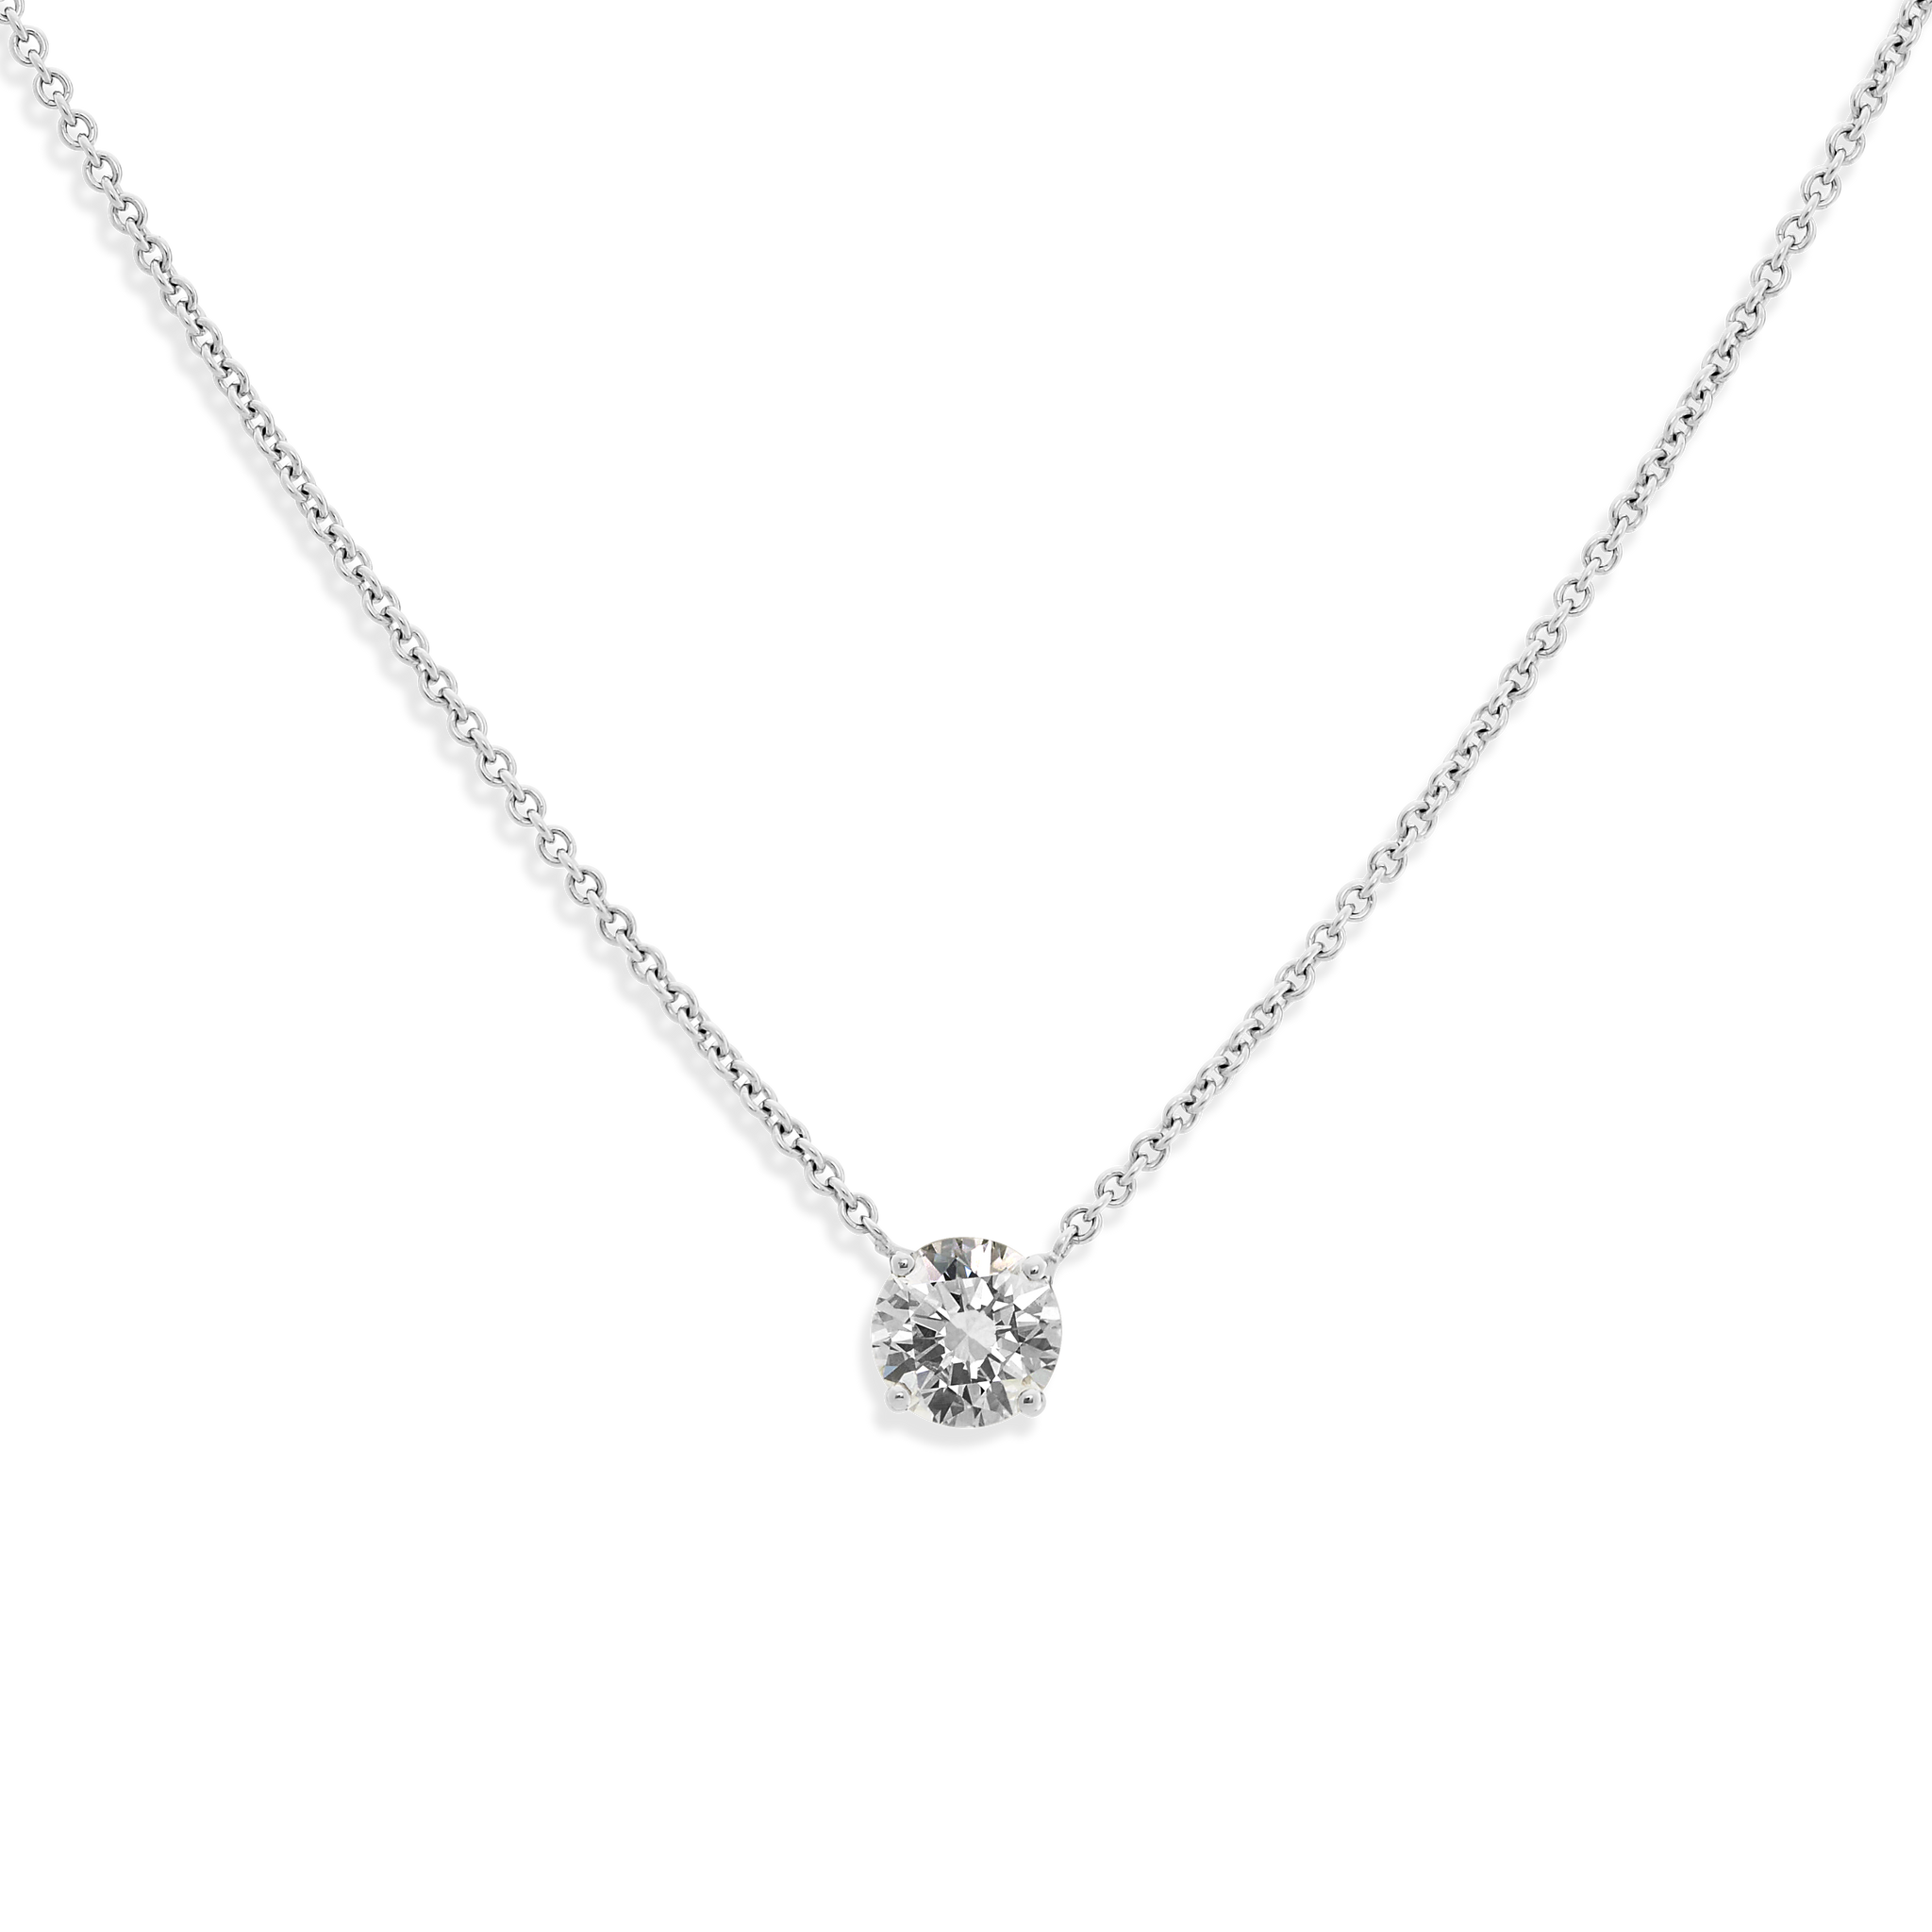 The ultimate timeless piece. A solitaire round brilliant is centered between the collarbone on an 18k gold chain. Shown here in White Gold.